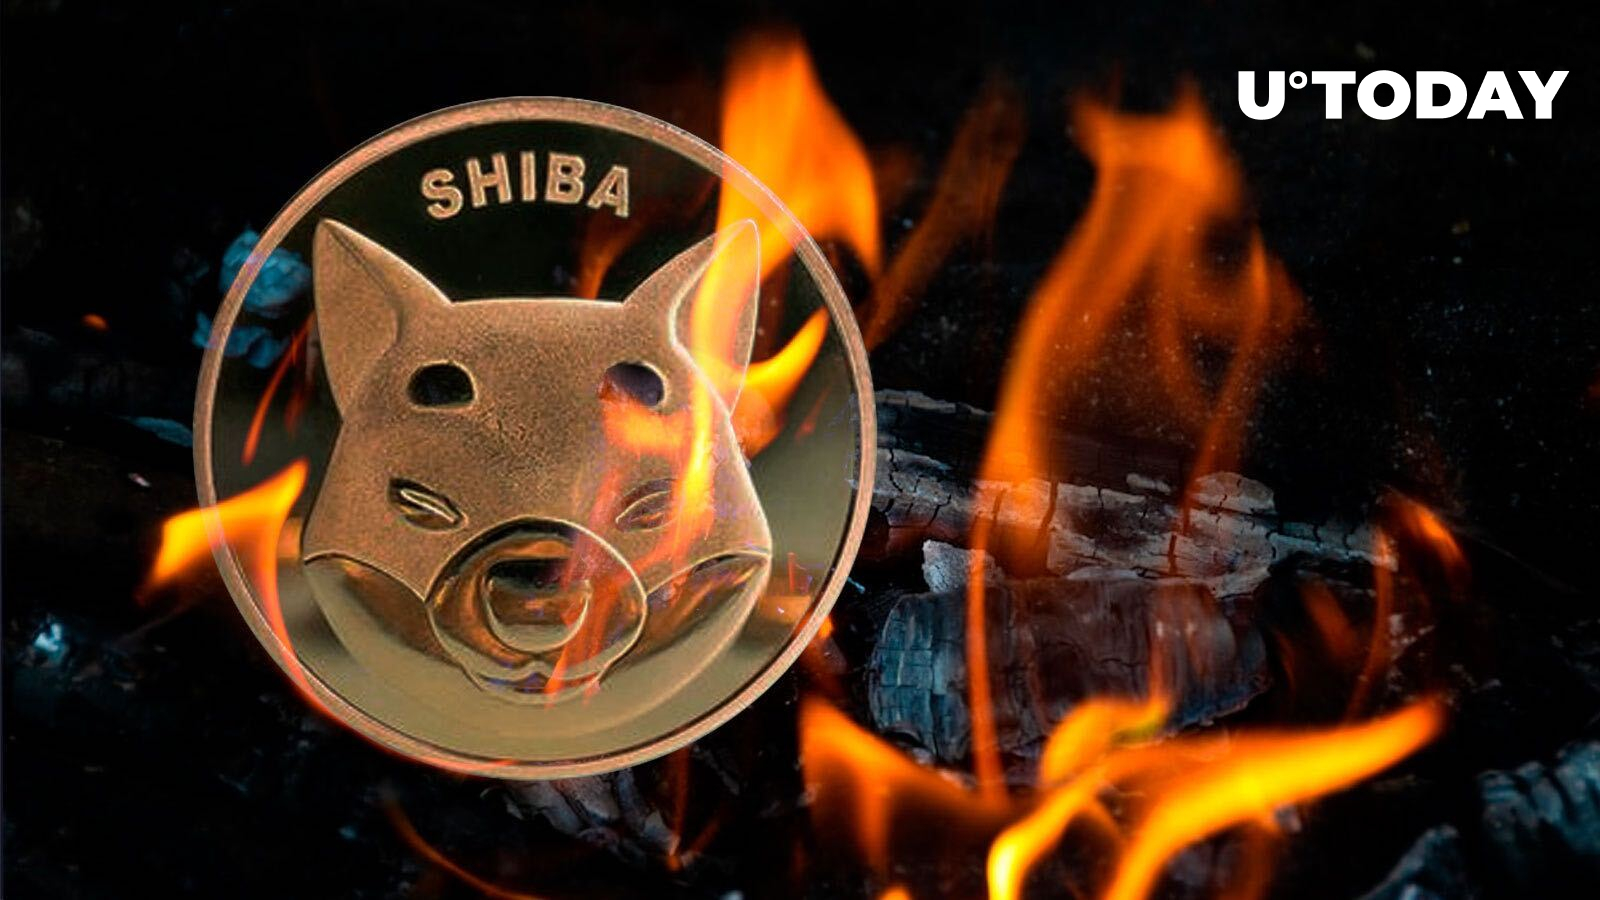 shiba-inu-records-3-6-billion-shib-burned-in-august-with-only-59-of-initial-supply-left